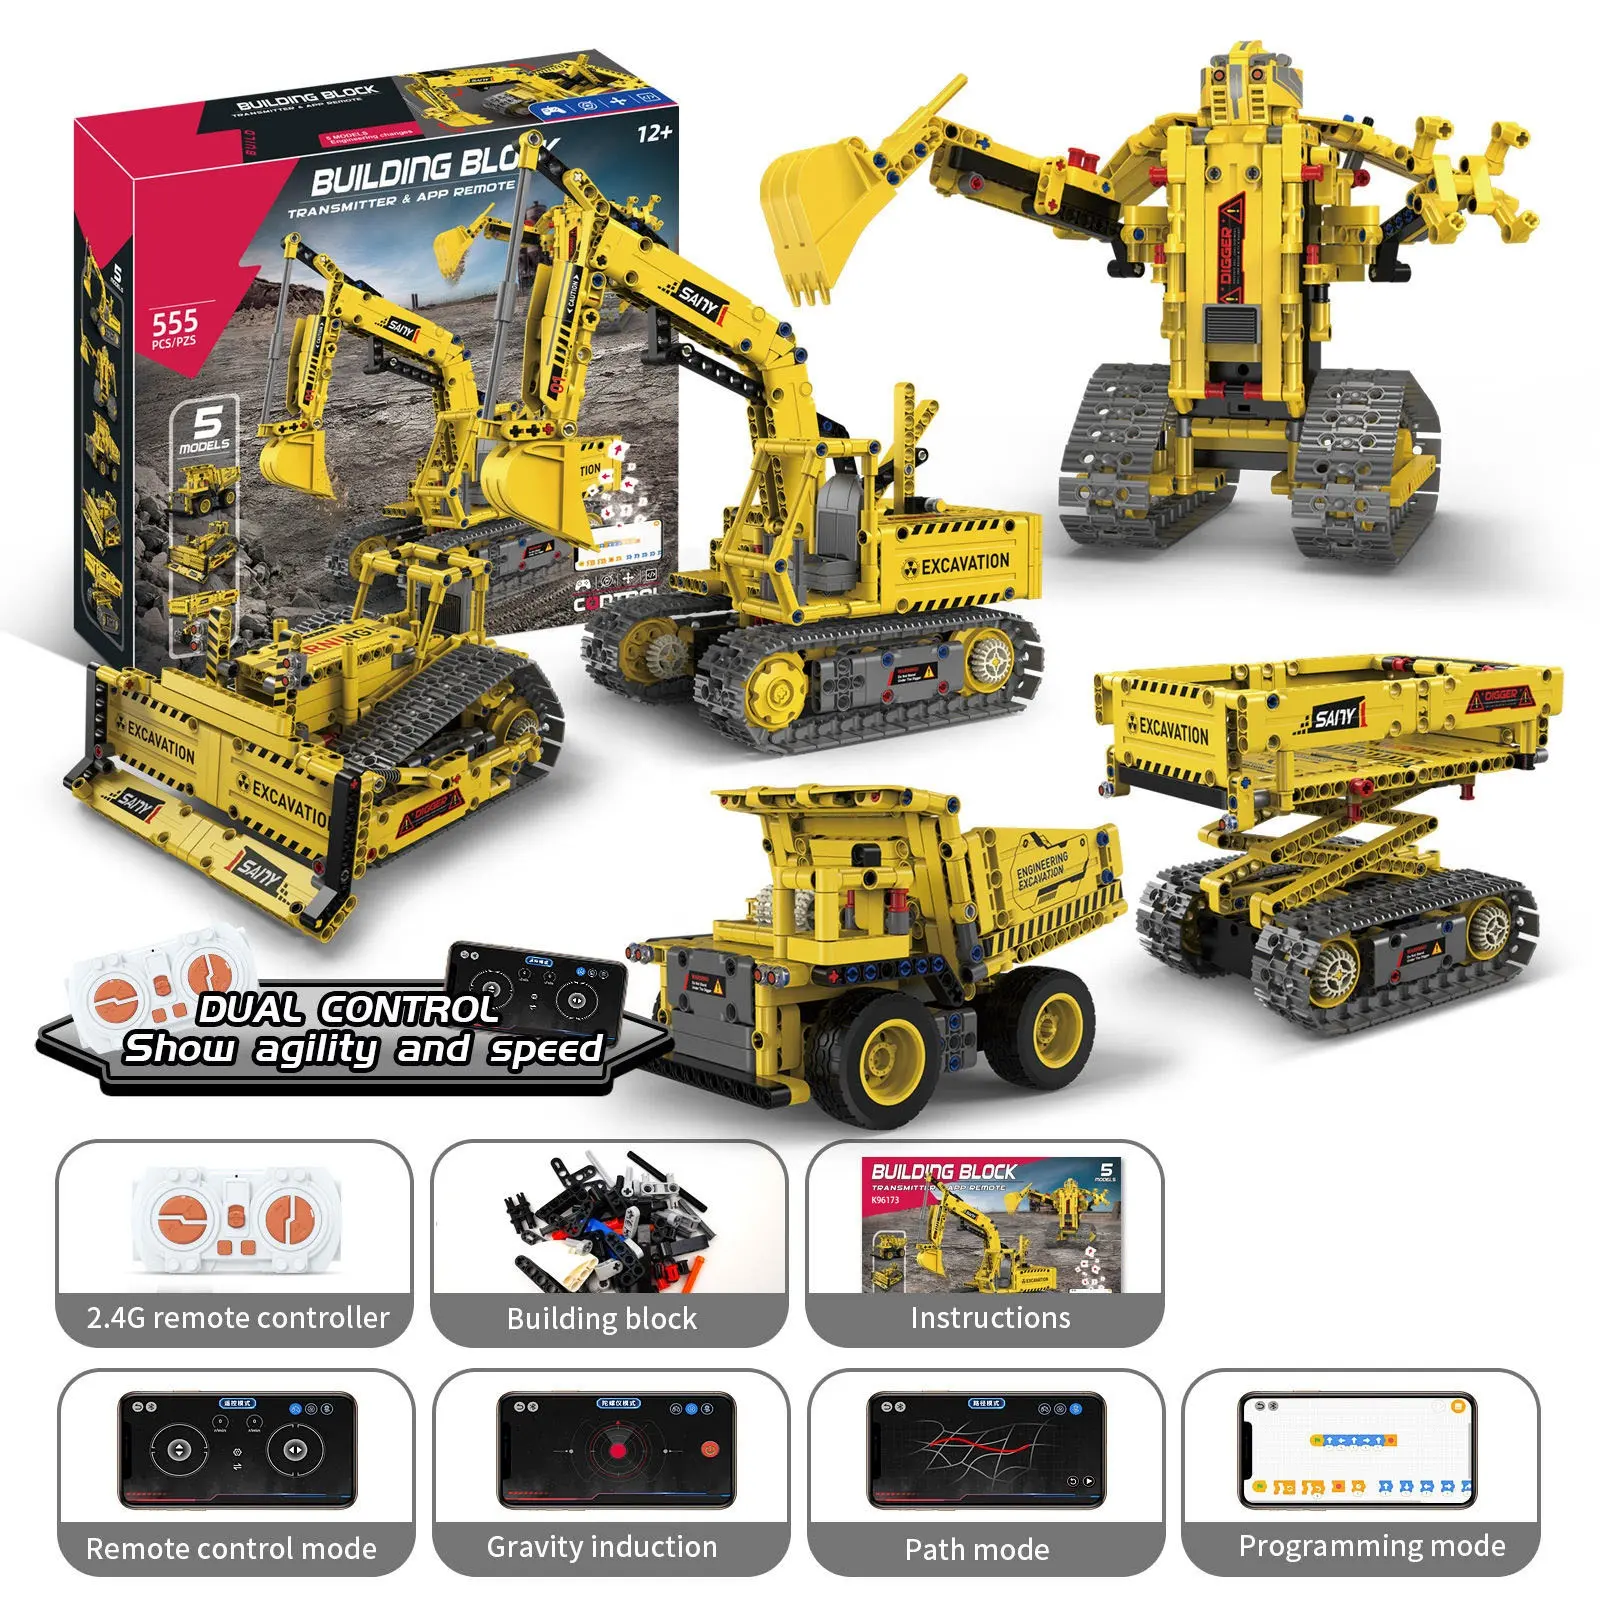 Educational 5 in 1 Engineering Robot Kit Toys STEM Programmable Electric Building Block Excavator toy